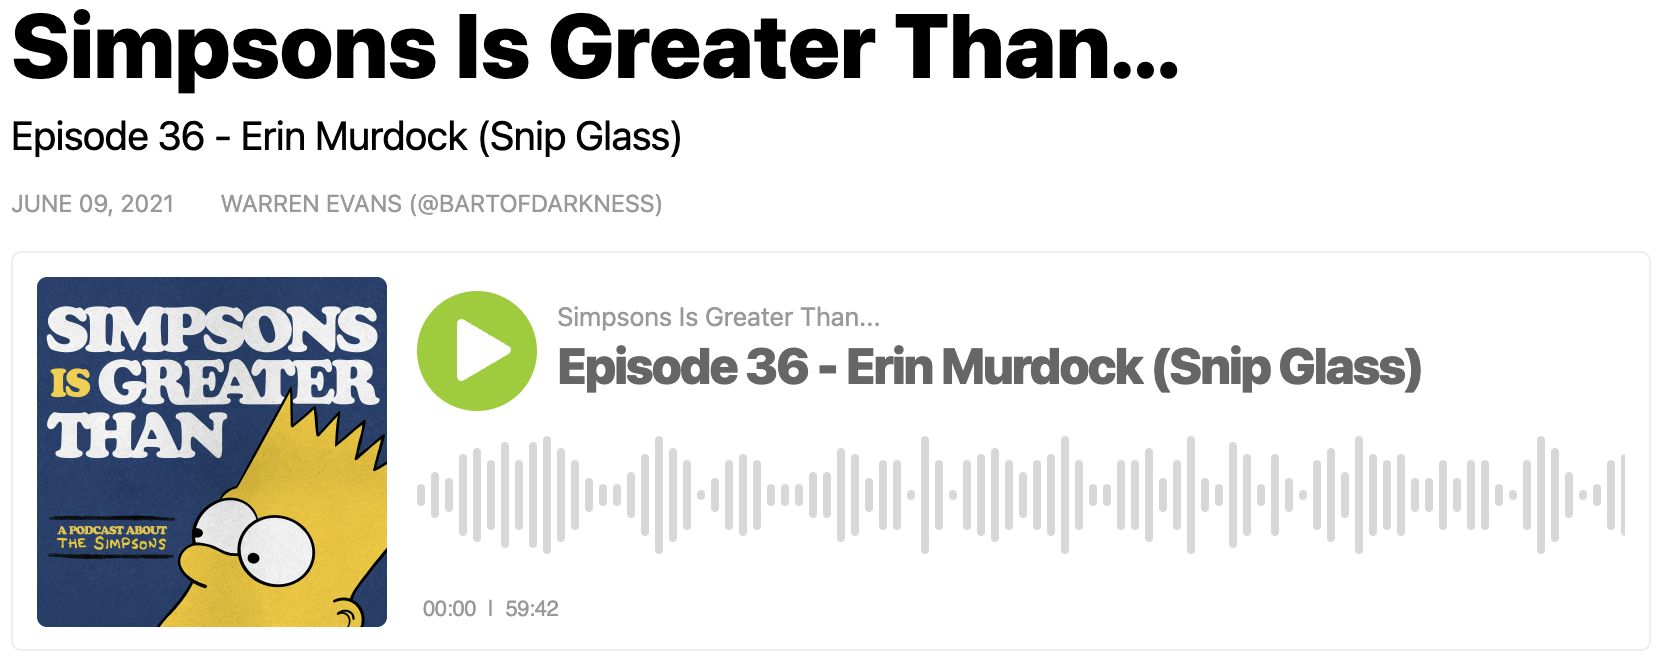 Simpson Is Greater Than Podcast Link